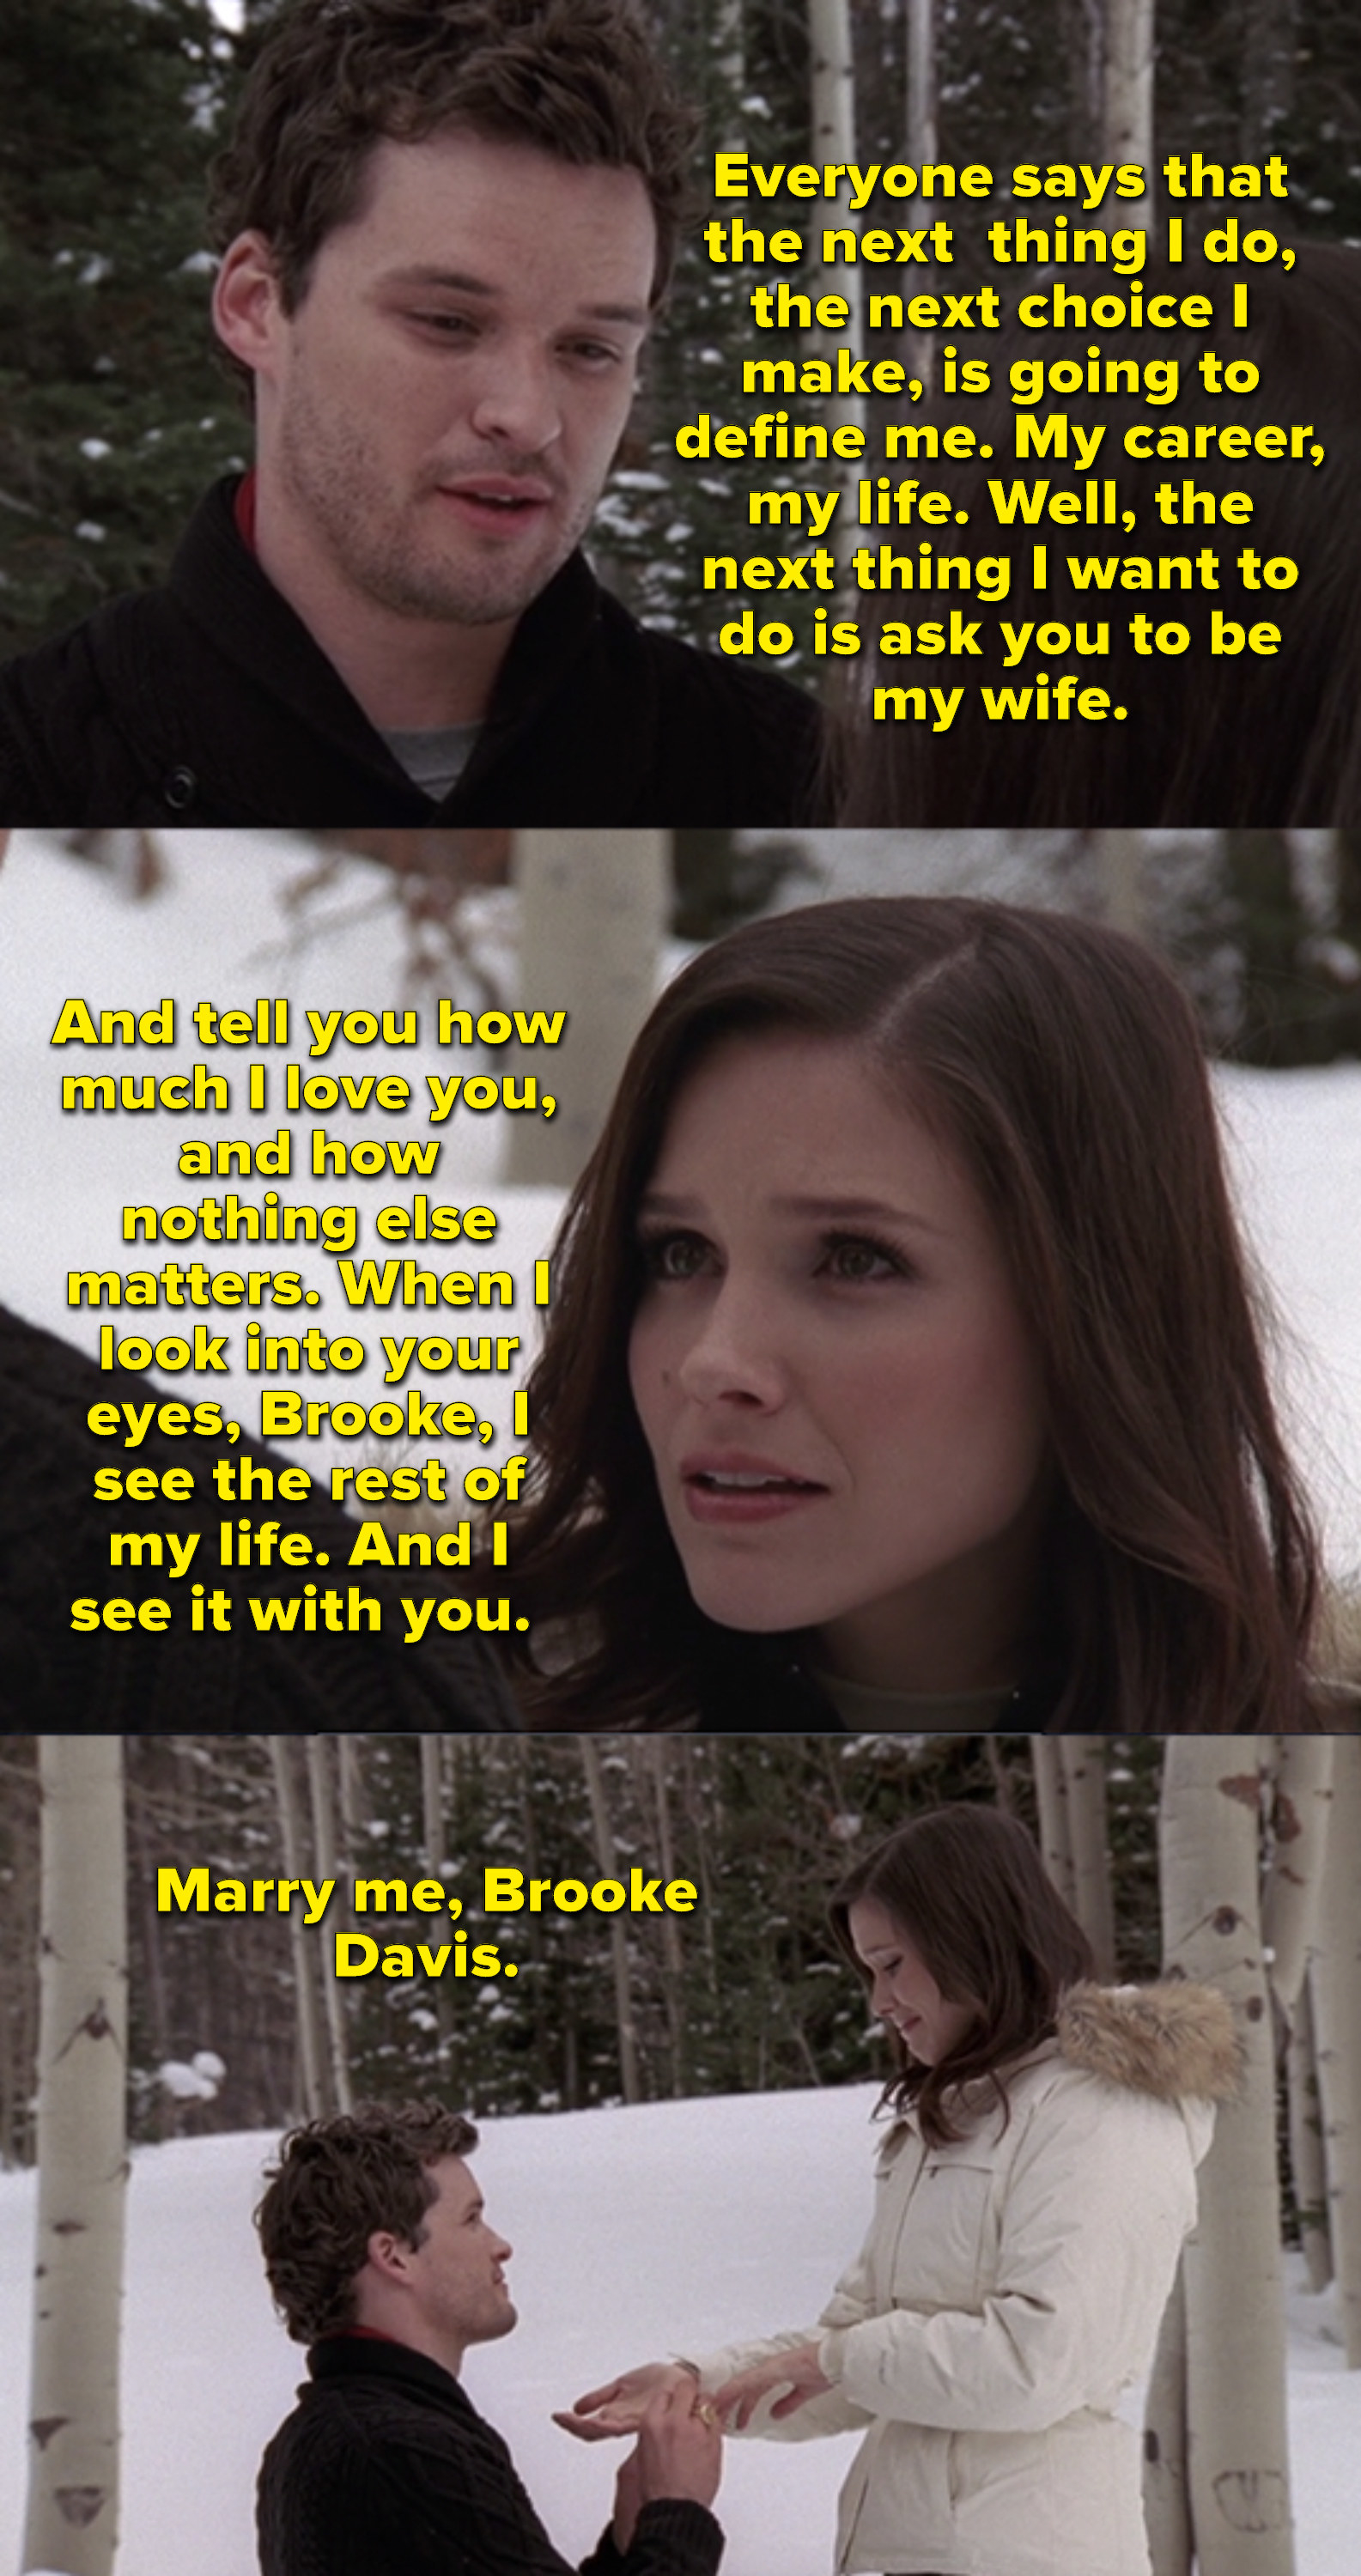 Julian asks Brooke to marry him in the snow, saying everyone&#x27;s saying the next big step he makes will define his life, and that he wants that move to be to marry her